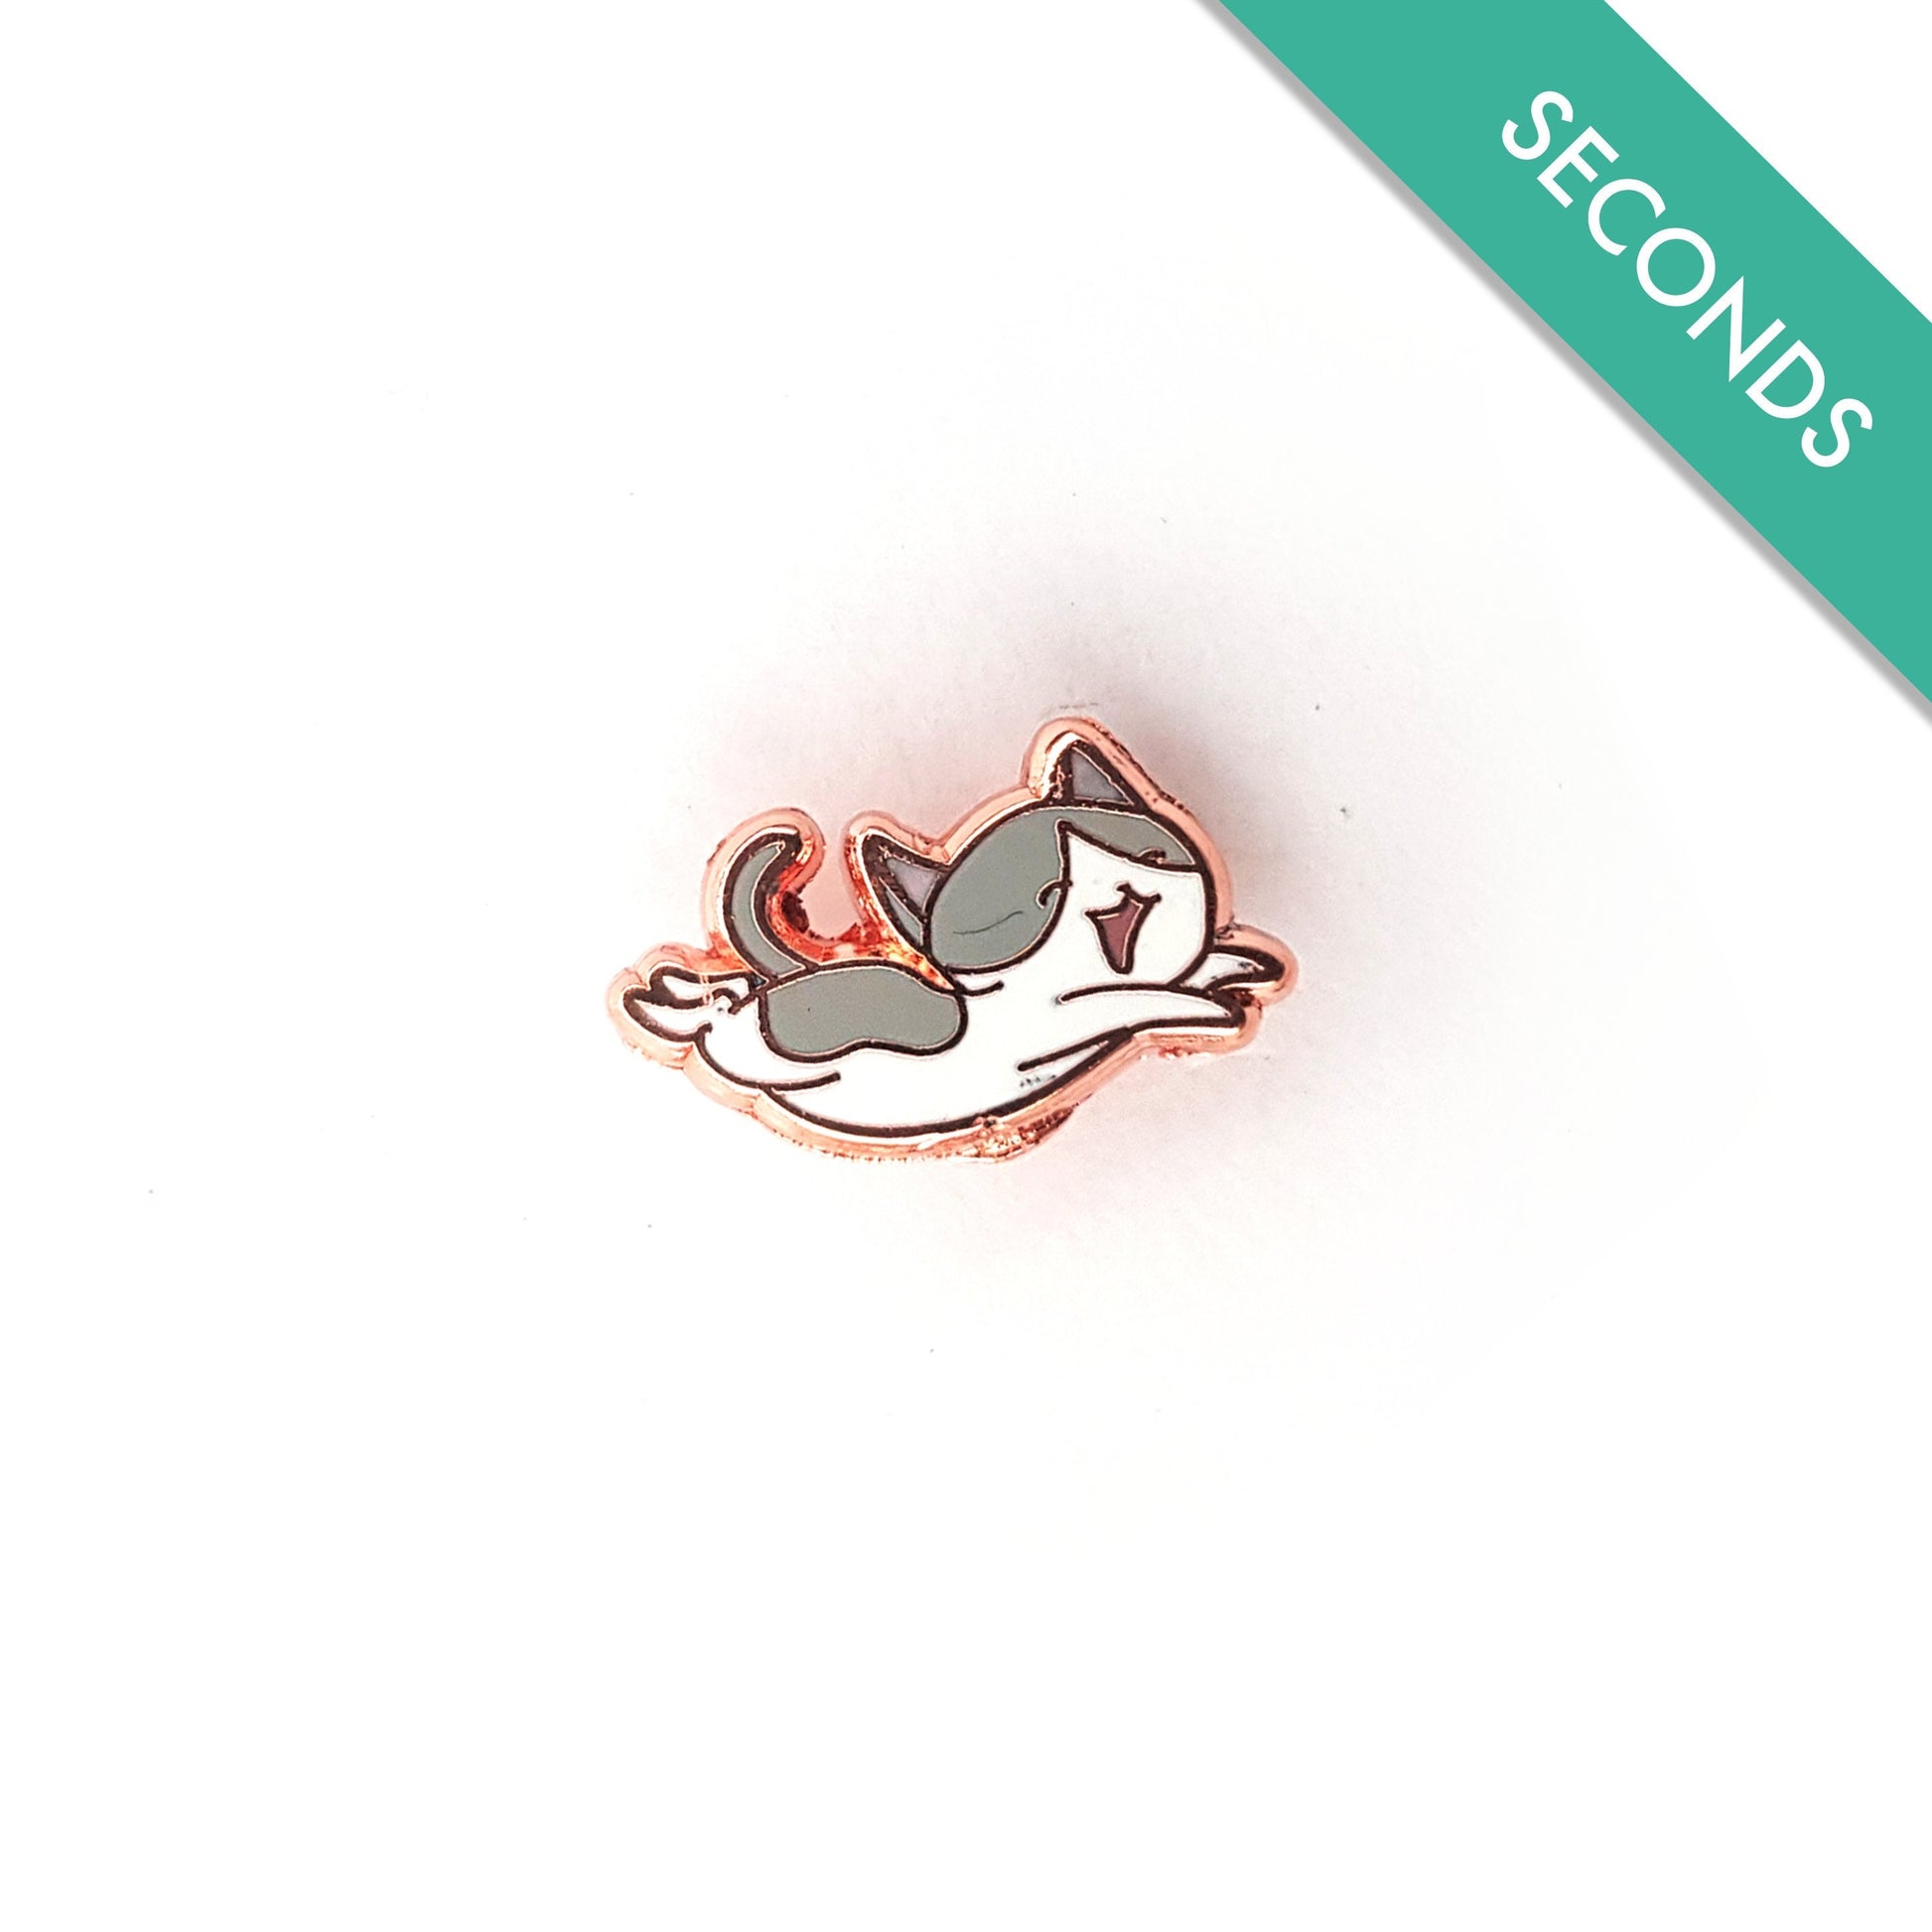 Leaping Kitty - Pin Seconds - Tiny Enamel Pin (Mac the Special Needs Cat)